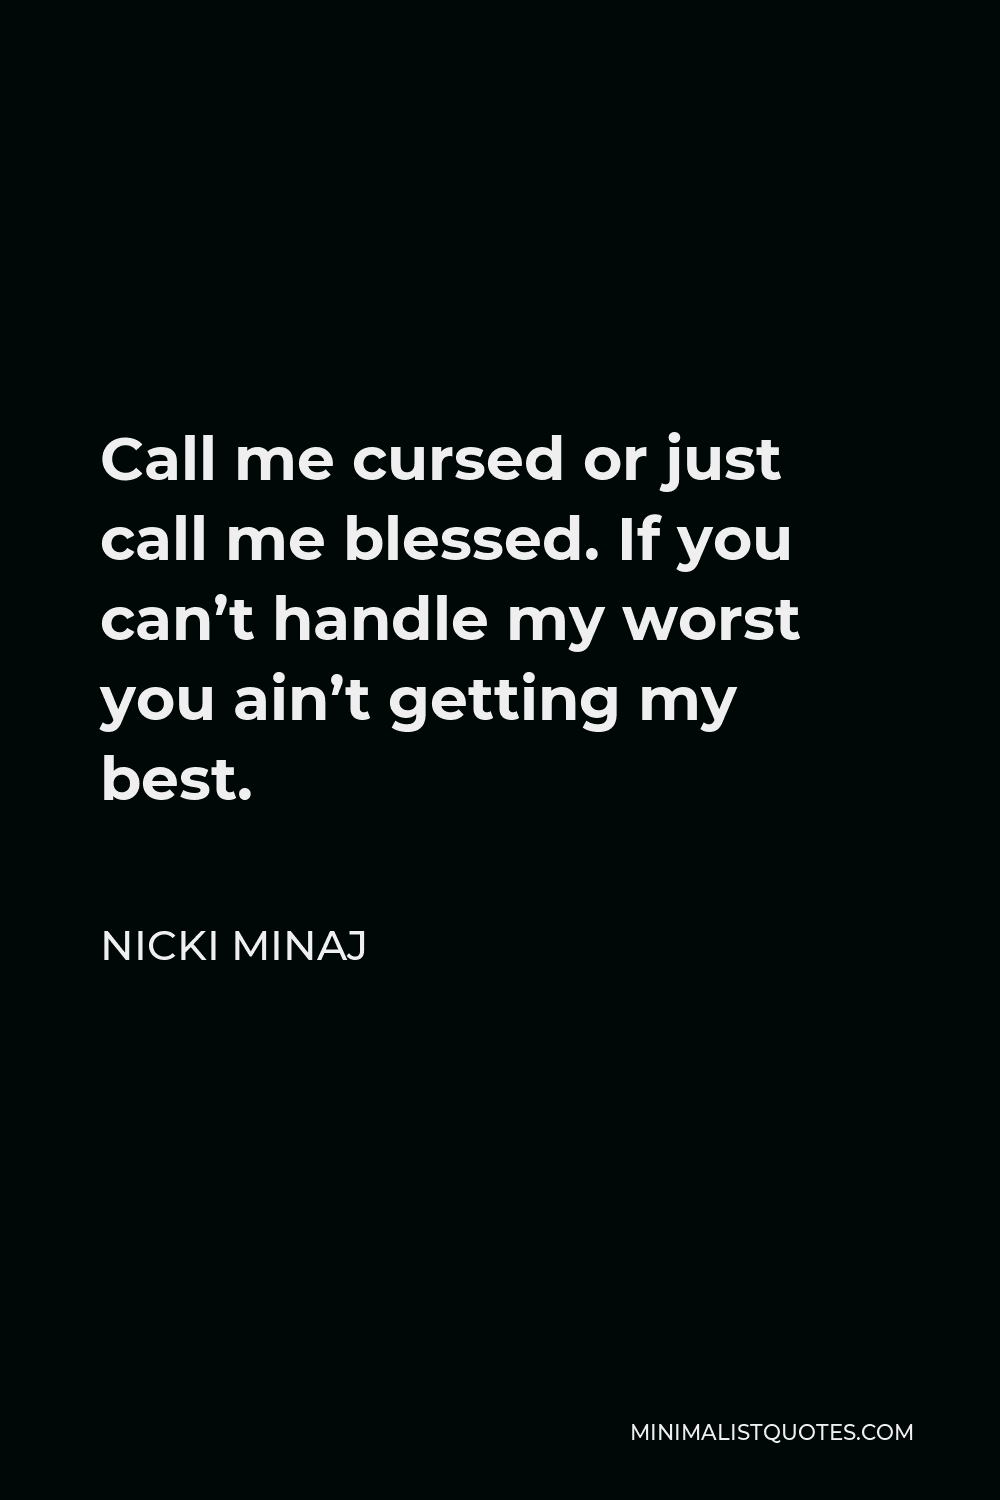 Nicki Minaj quote: To adjust your philosophy and creativity in